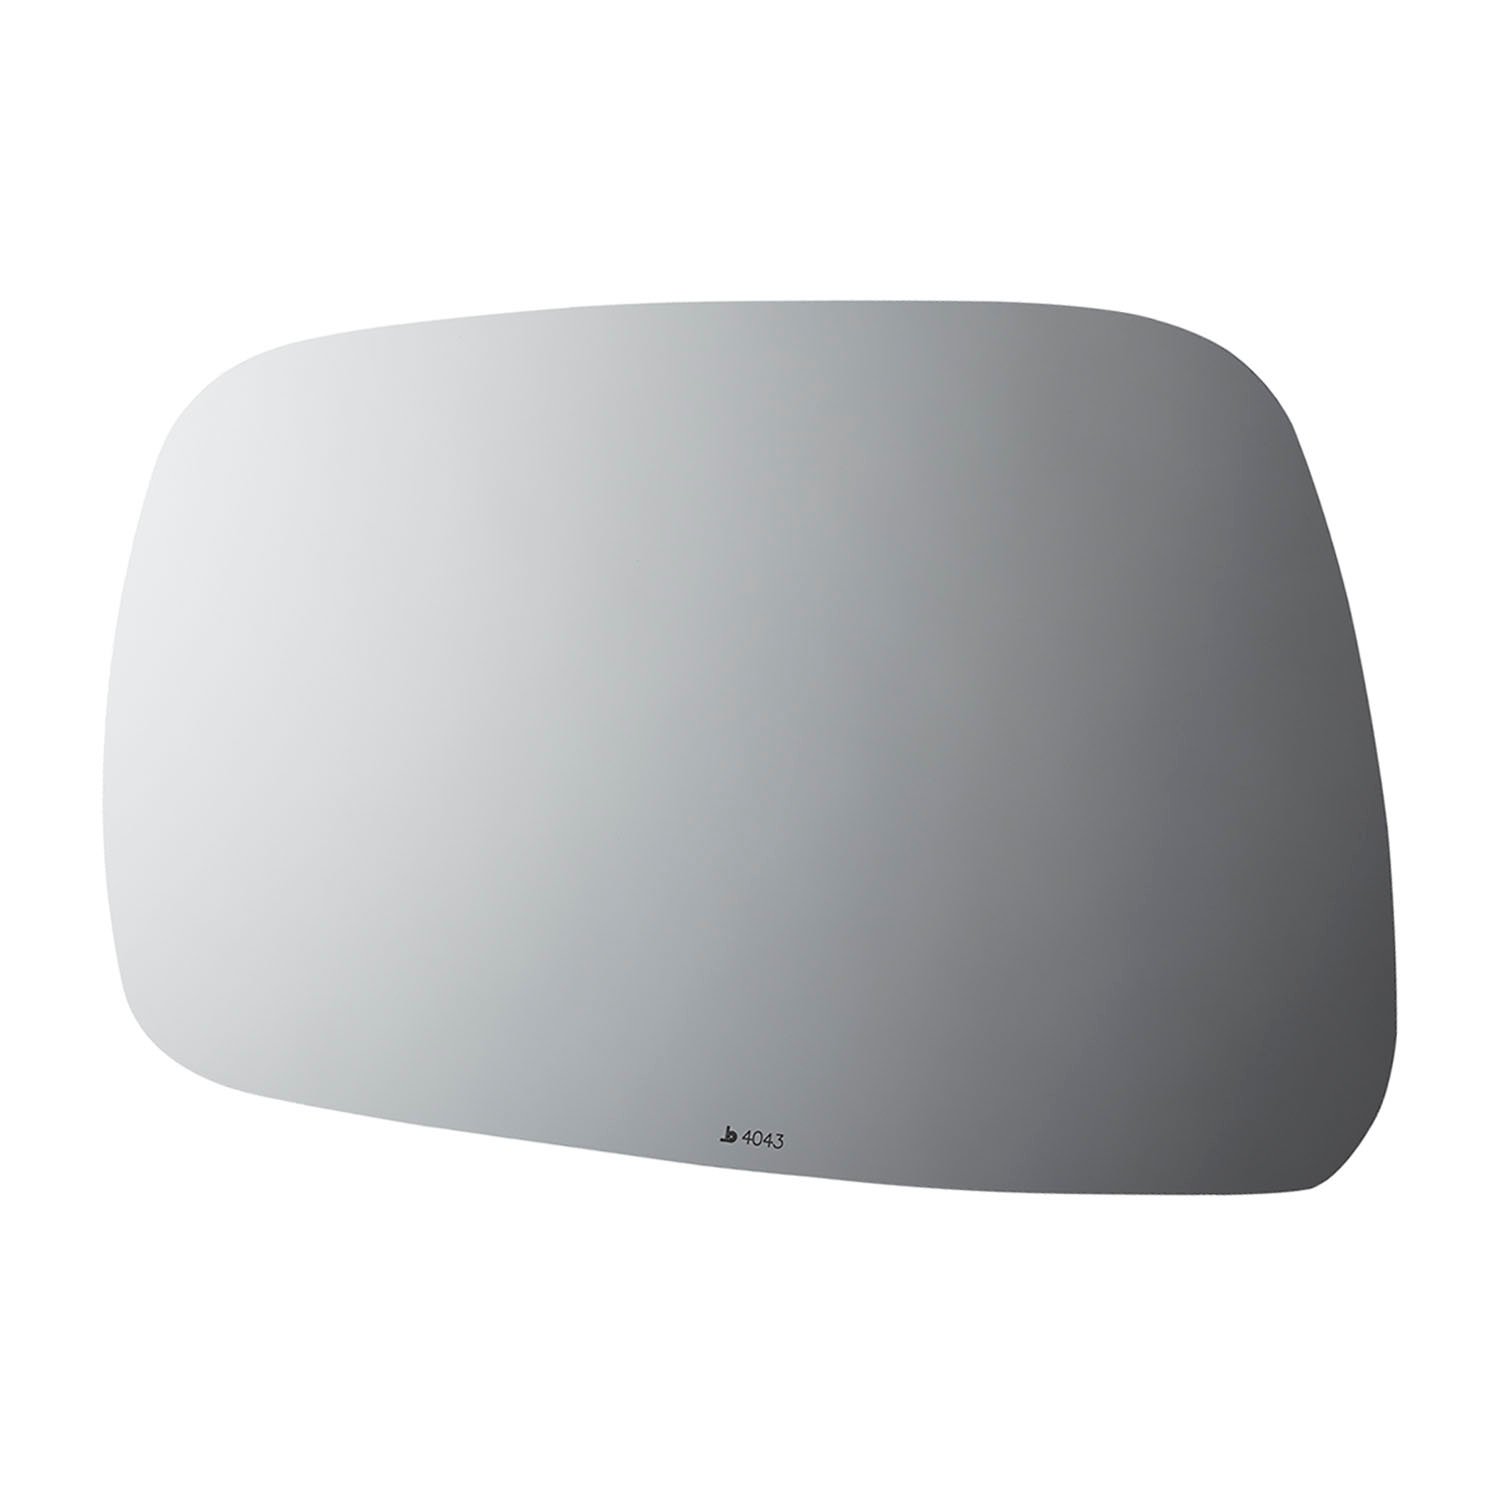 4043 SIDE VIEW MIRROR